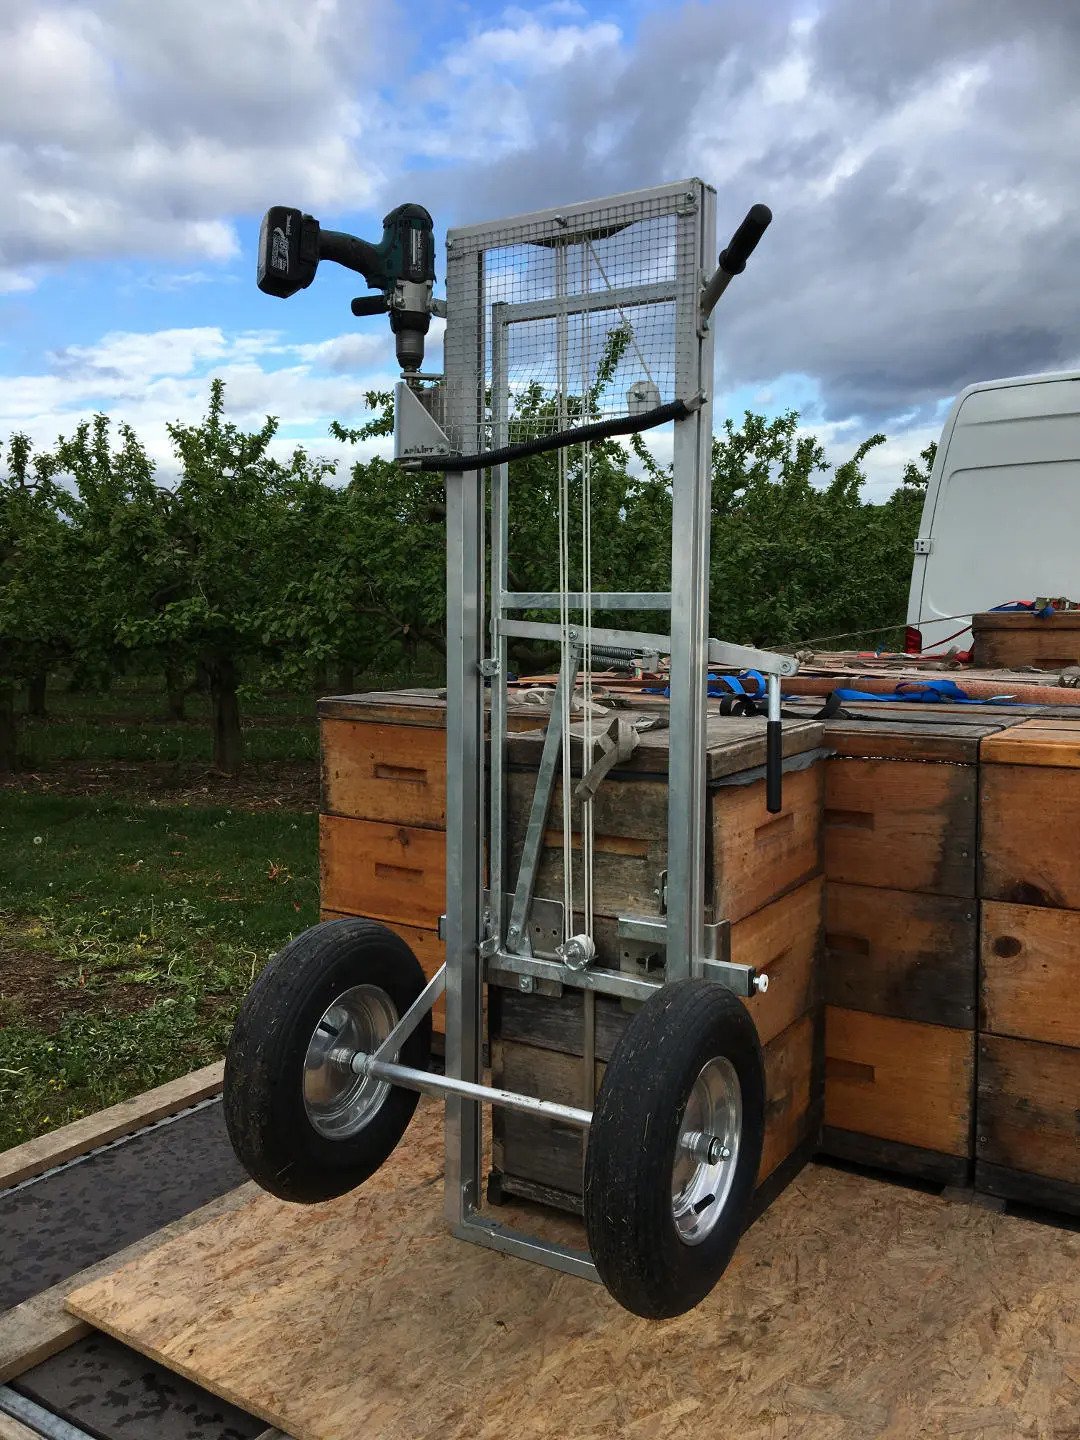 Best Beehive Lifting Equipment and Carts - Apilift Beehive Lifter